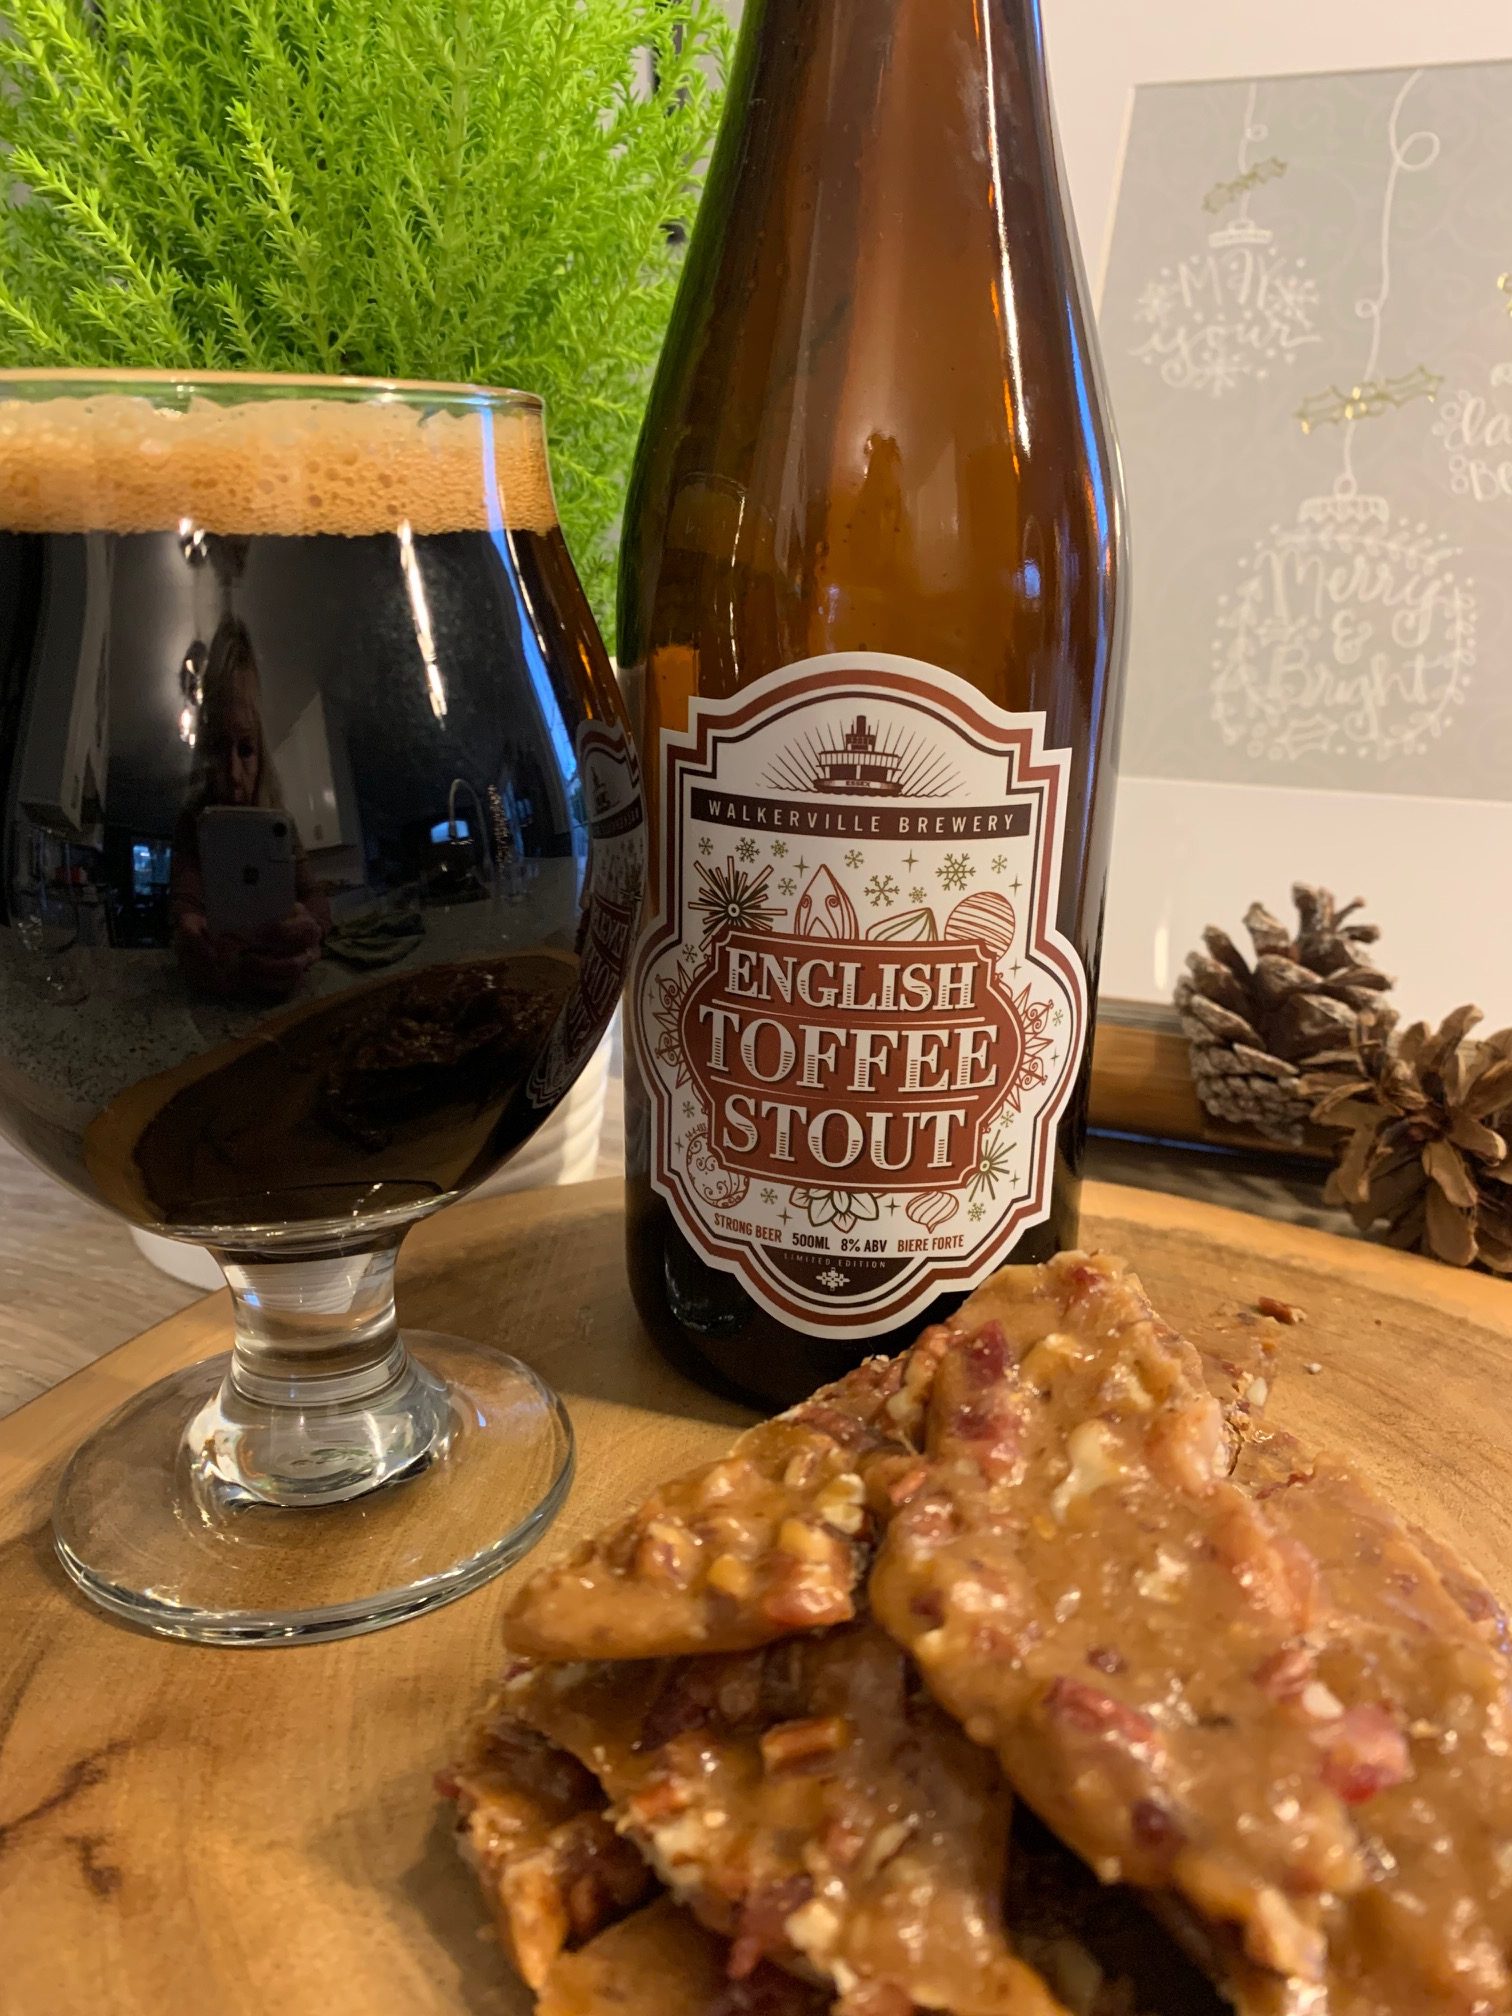 Featured image for “Walkerville Brewery English Toffee Stout with Beer & Bacon Brittle.”